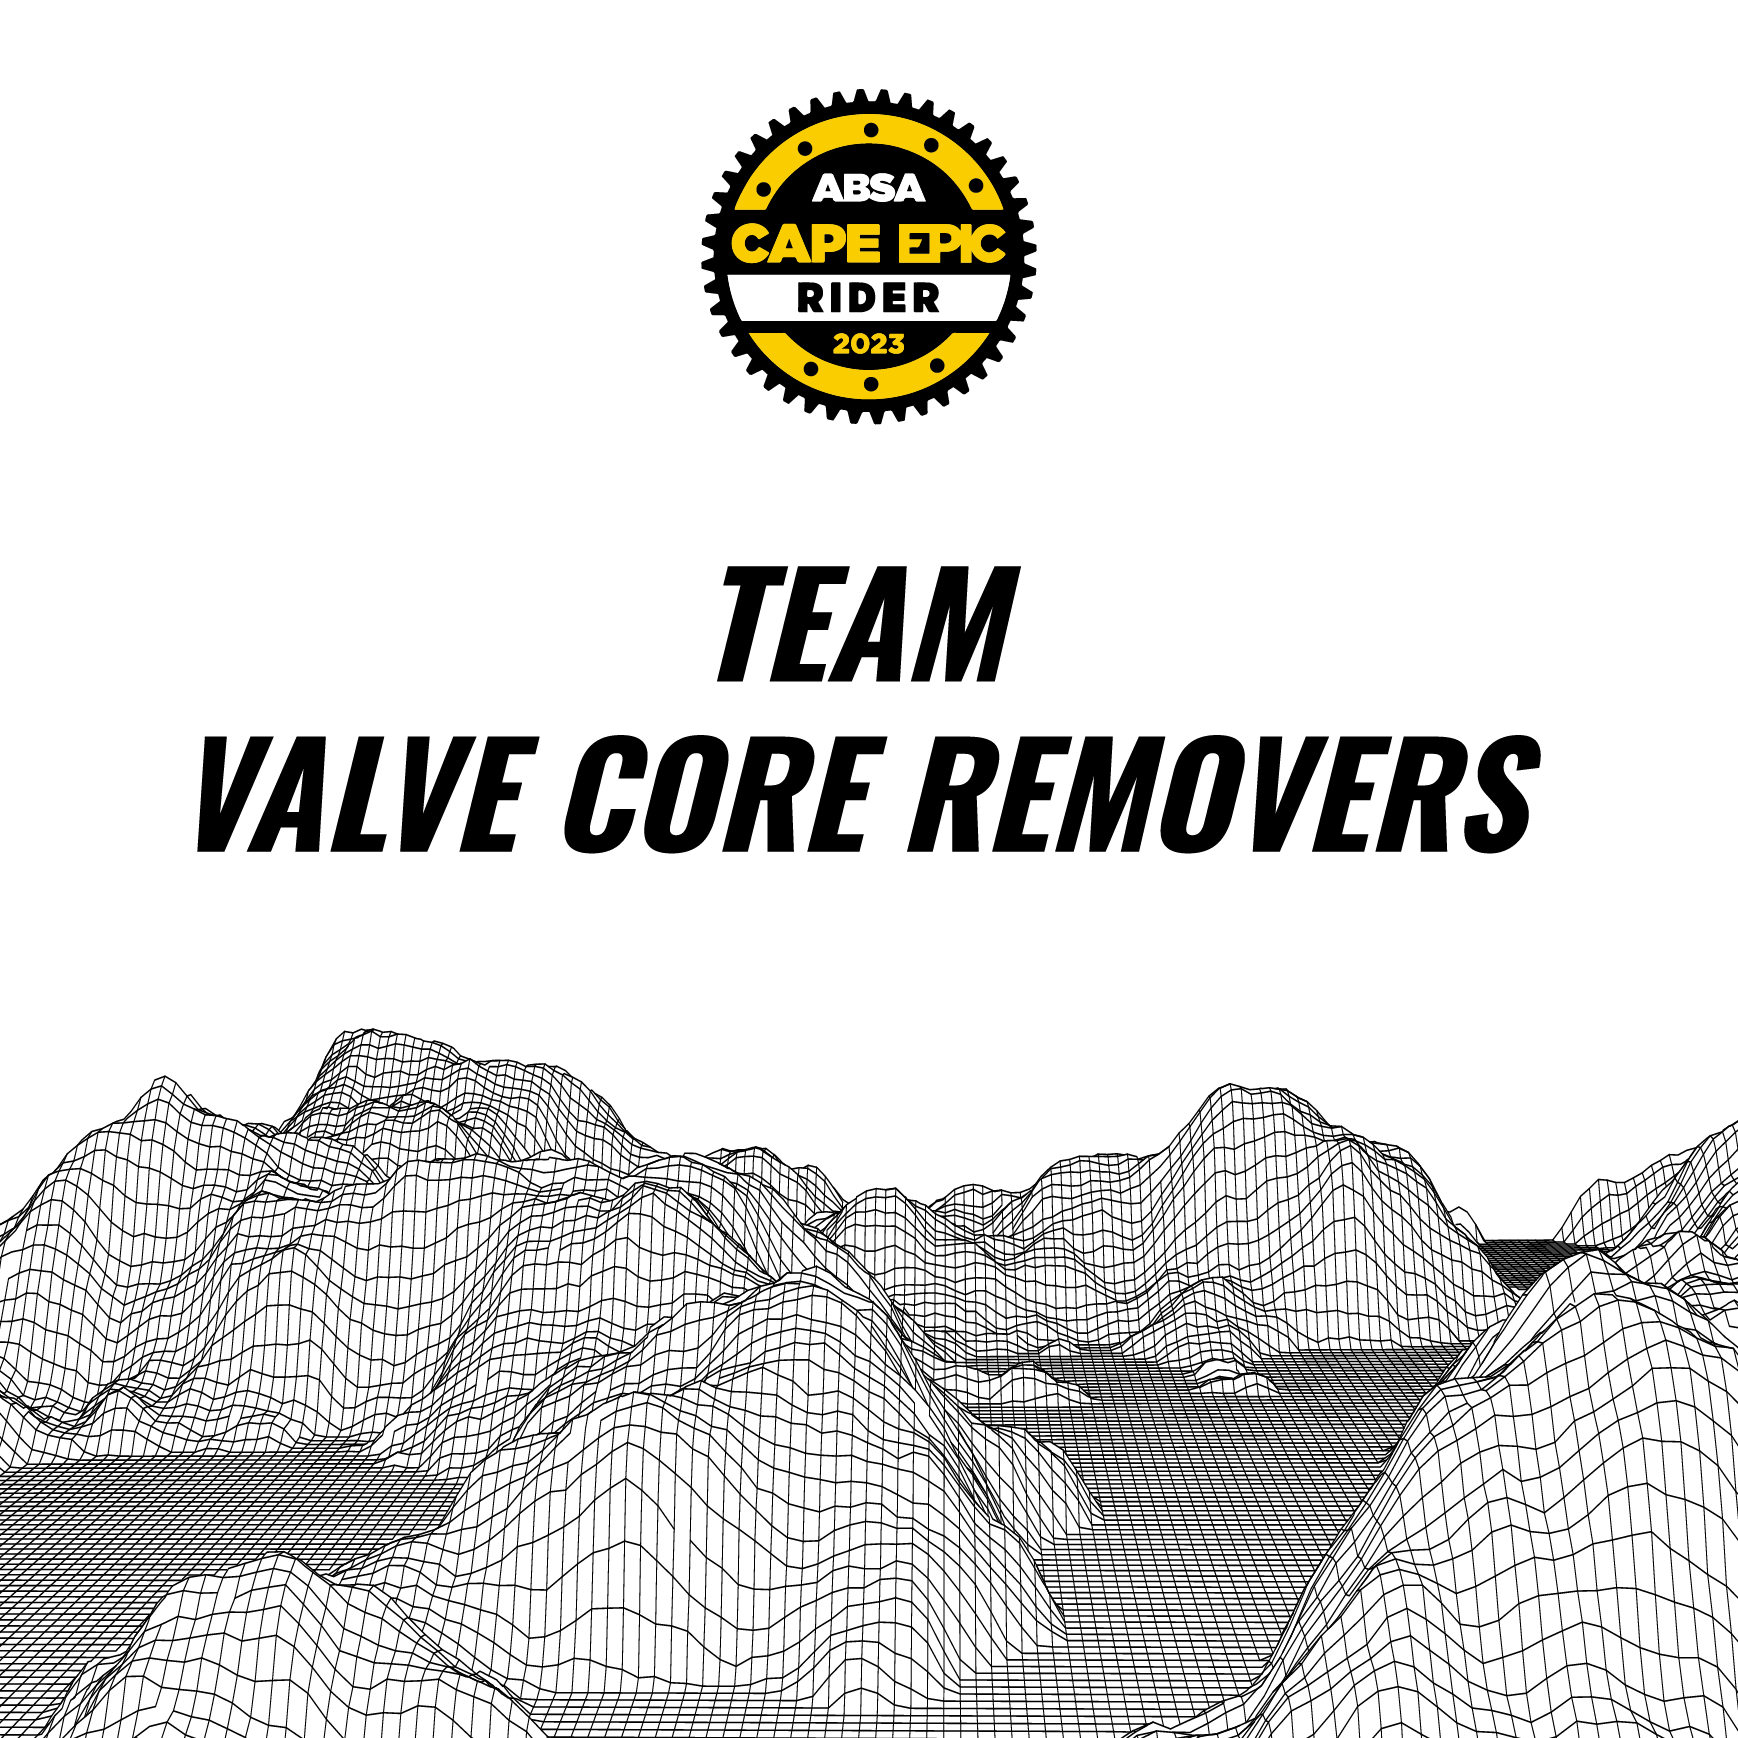 Club Image for TEAM VALVE CORE REMOVERS